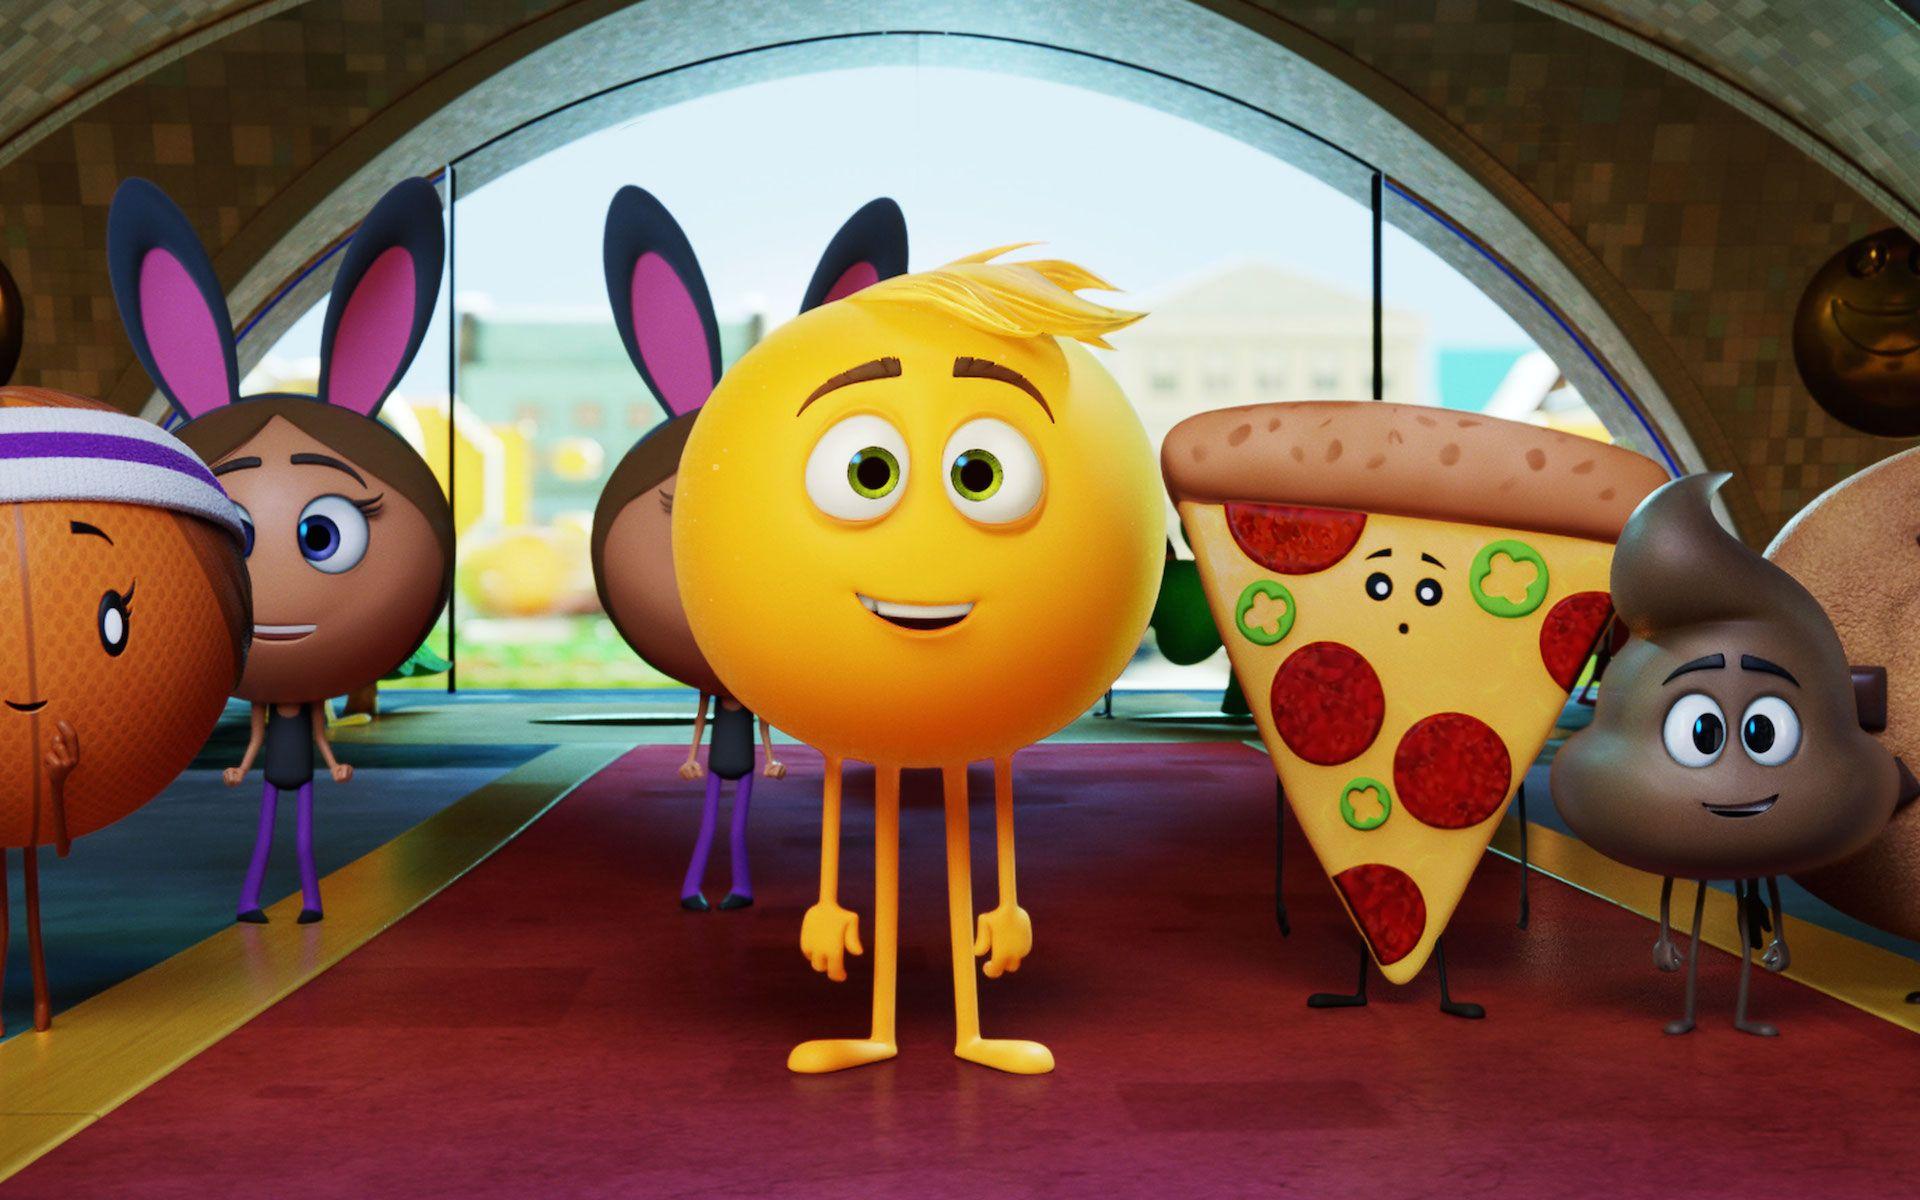 Film Review: 'The Emoji Movie' is decadent and depraved